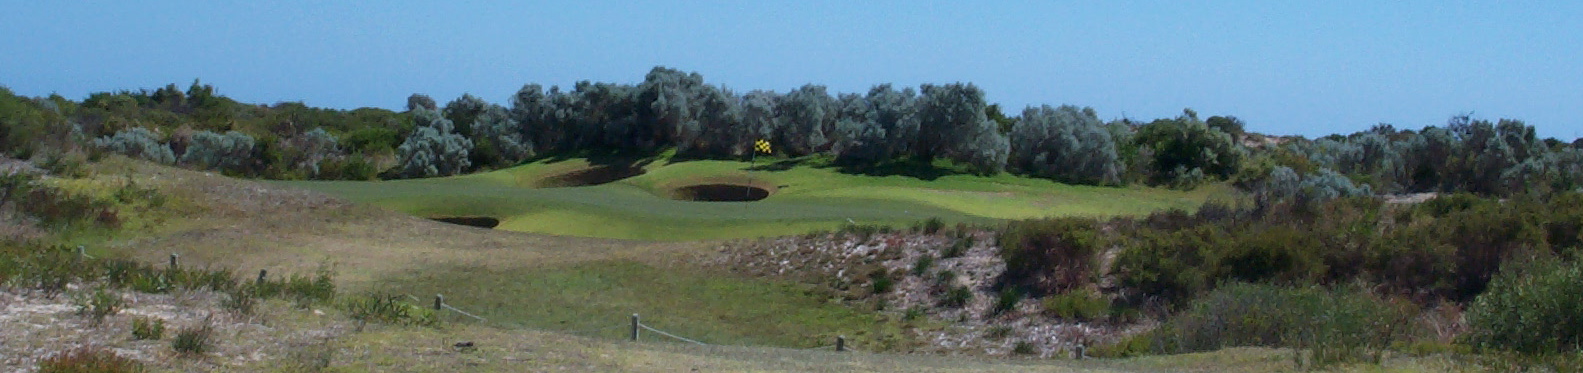 'Wee Tap'- hole16 at The Links at Kennedy Bay